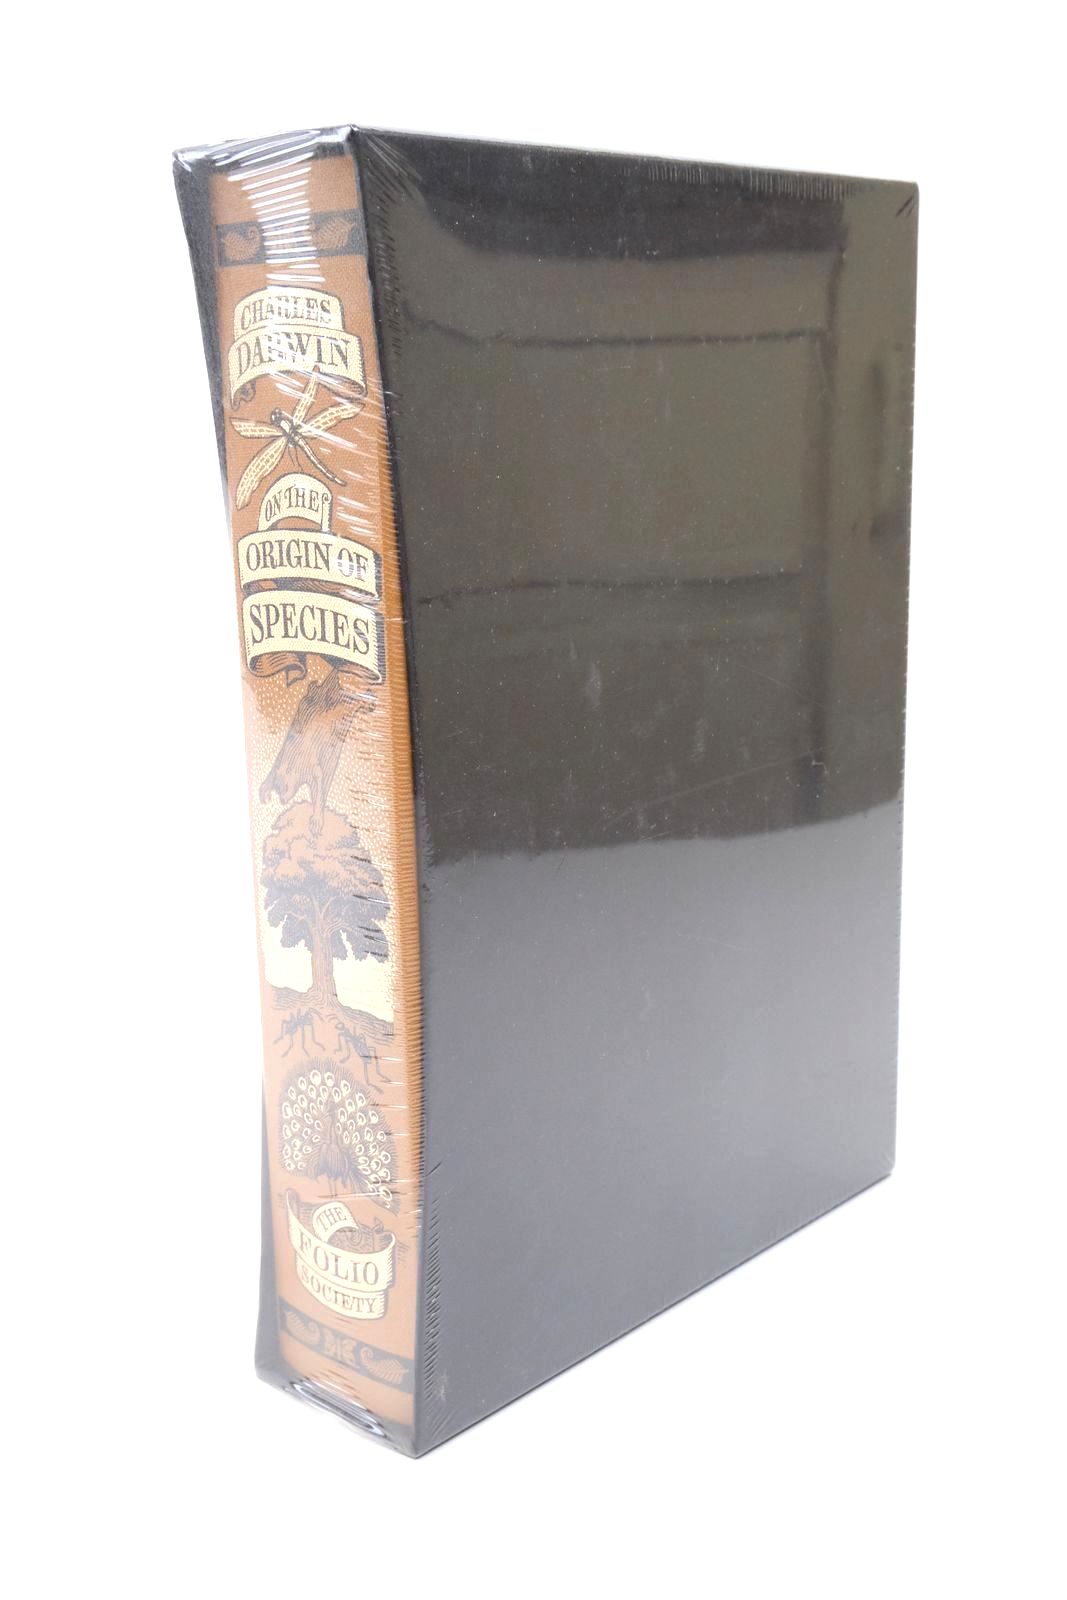 Photo of ON THE ORIGIN OF SPECIES: BY MEANS OF NATURAL SELECTION written by Darwin, Charles Keynes, Richard published by Folio Society (STOCK CODE: 1322551)  for sale by Stella & Rose's Books